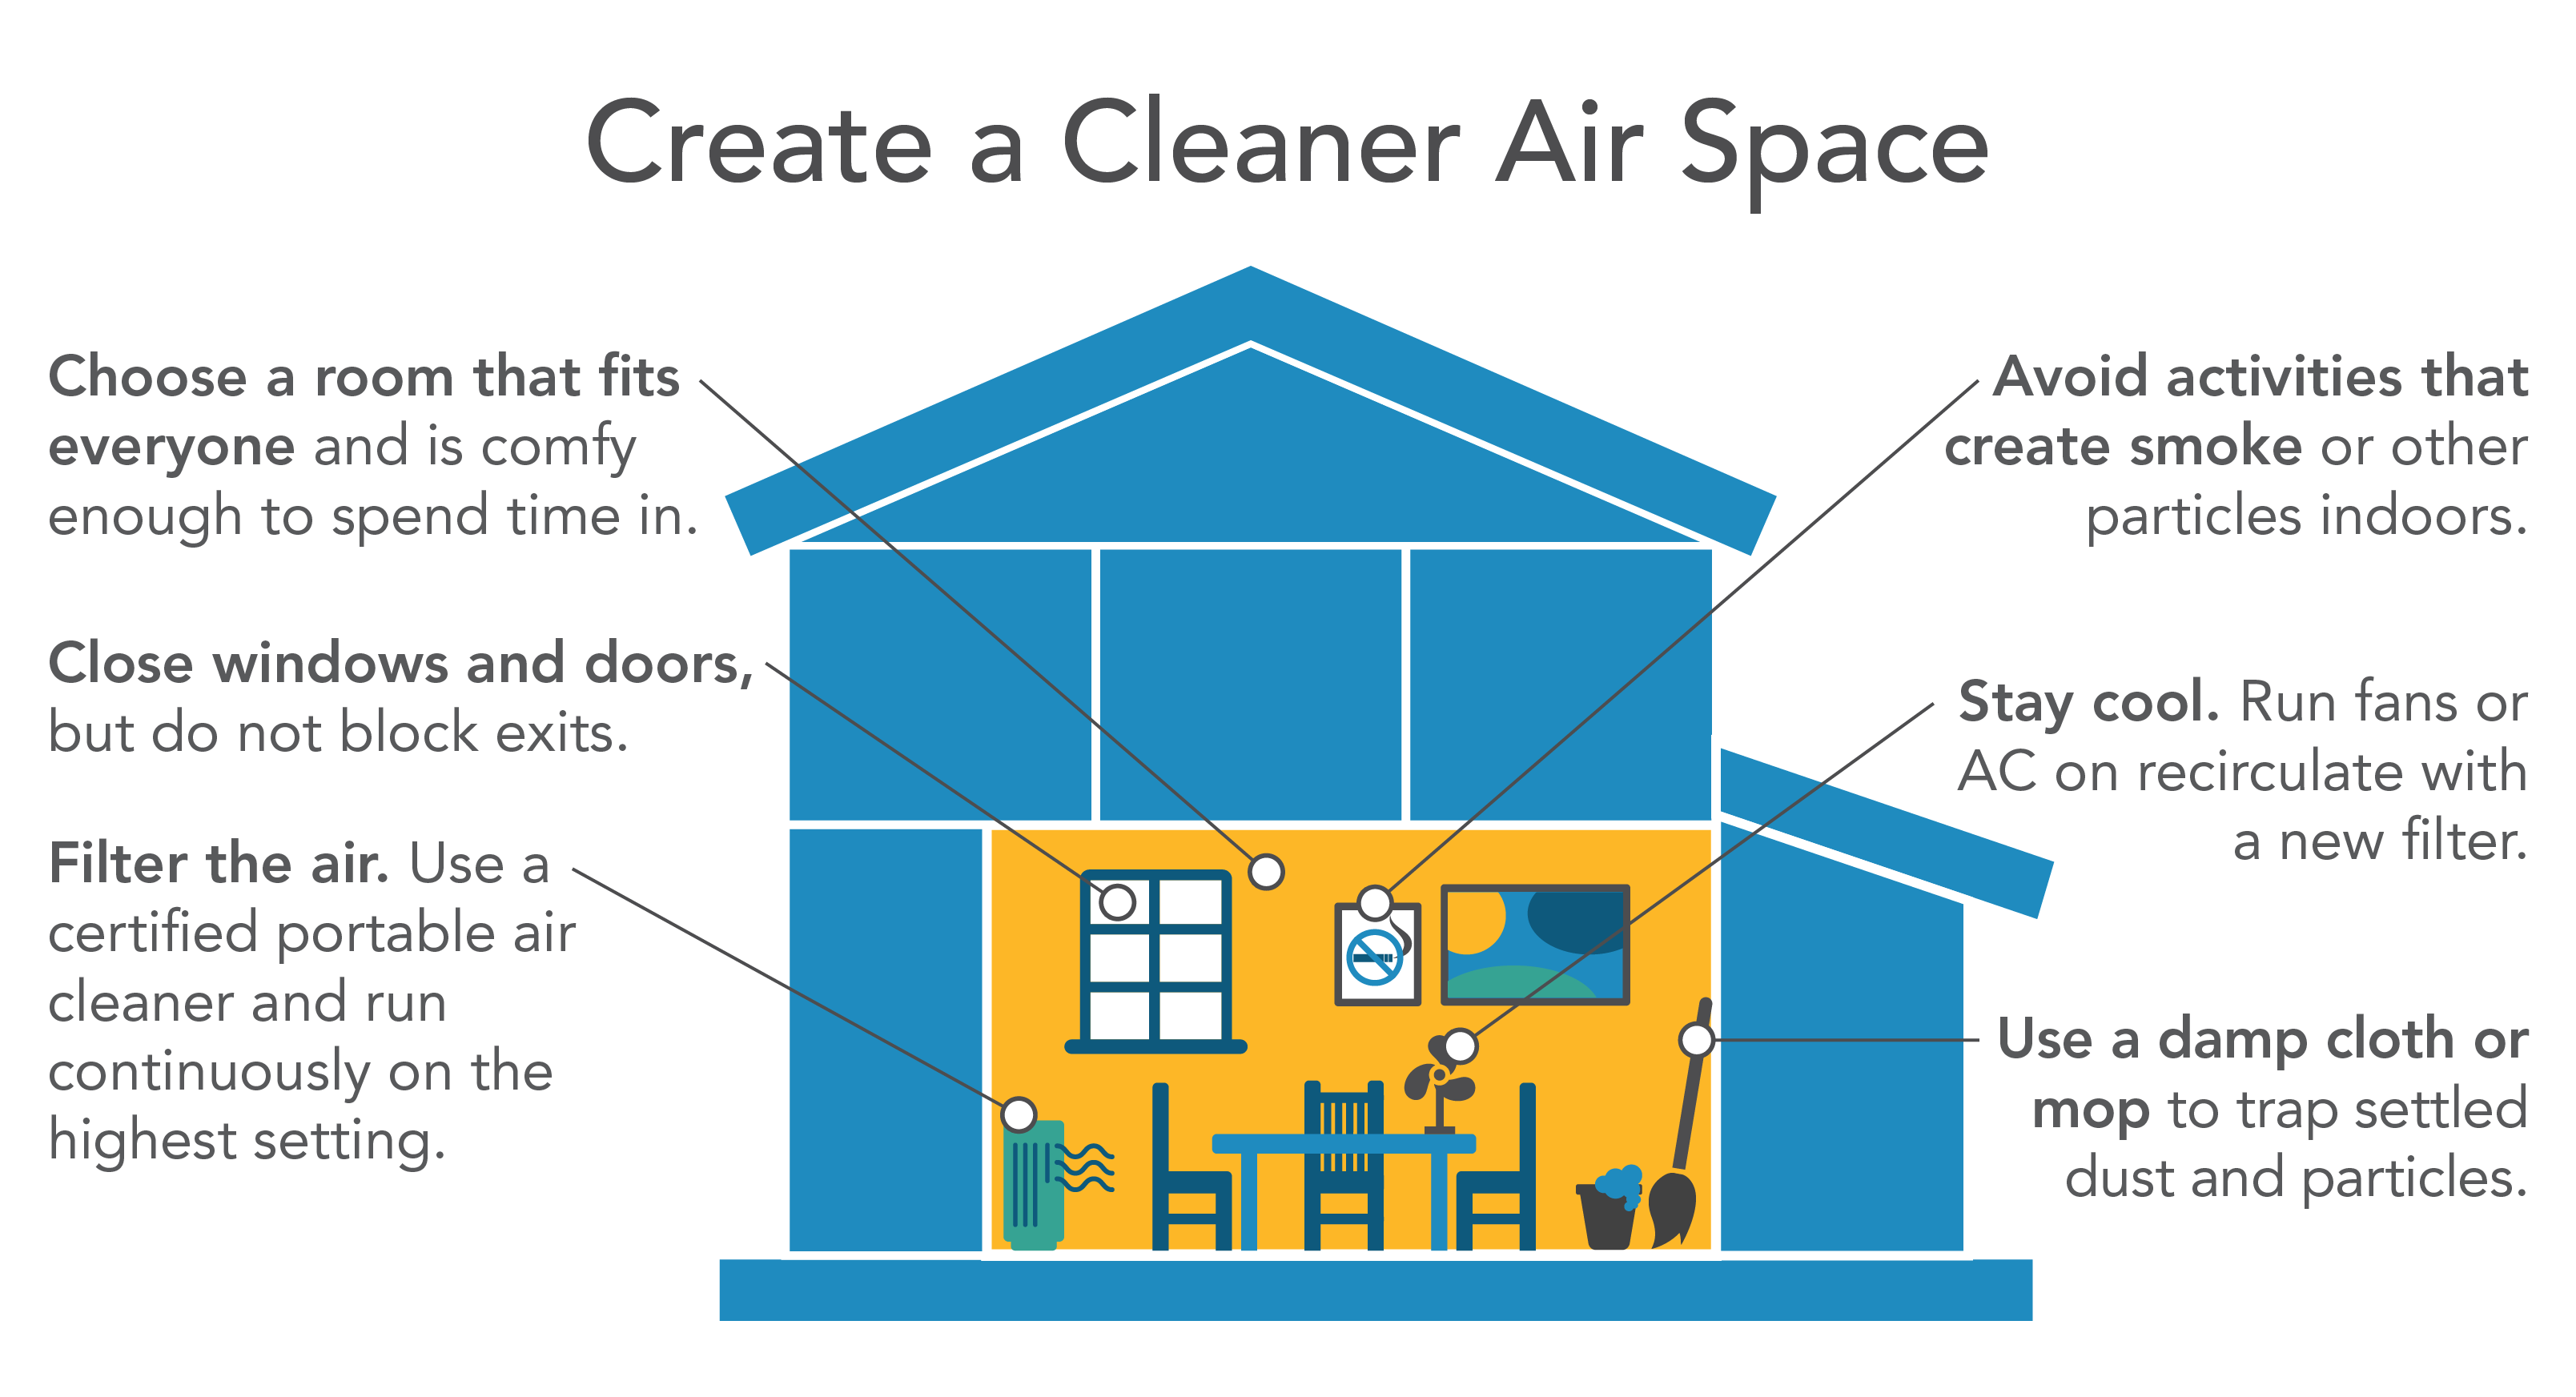 Create a Cleaner Air Space. Choose a room that fits everyone and is comfy enough to spend time in. Close windows and doors, but do not block exits. Filter the air. Use a certified portable air cleaner and run continuously on the highest setting. Avoid activities that create smoke or other particles indoors. Stay cool. Run fans or AC on recirculate with a new filter. Use a damp cloth or mop to trap settled dust and particles.  